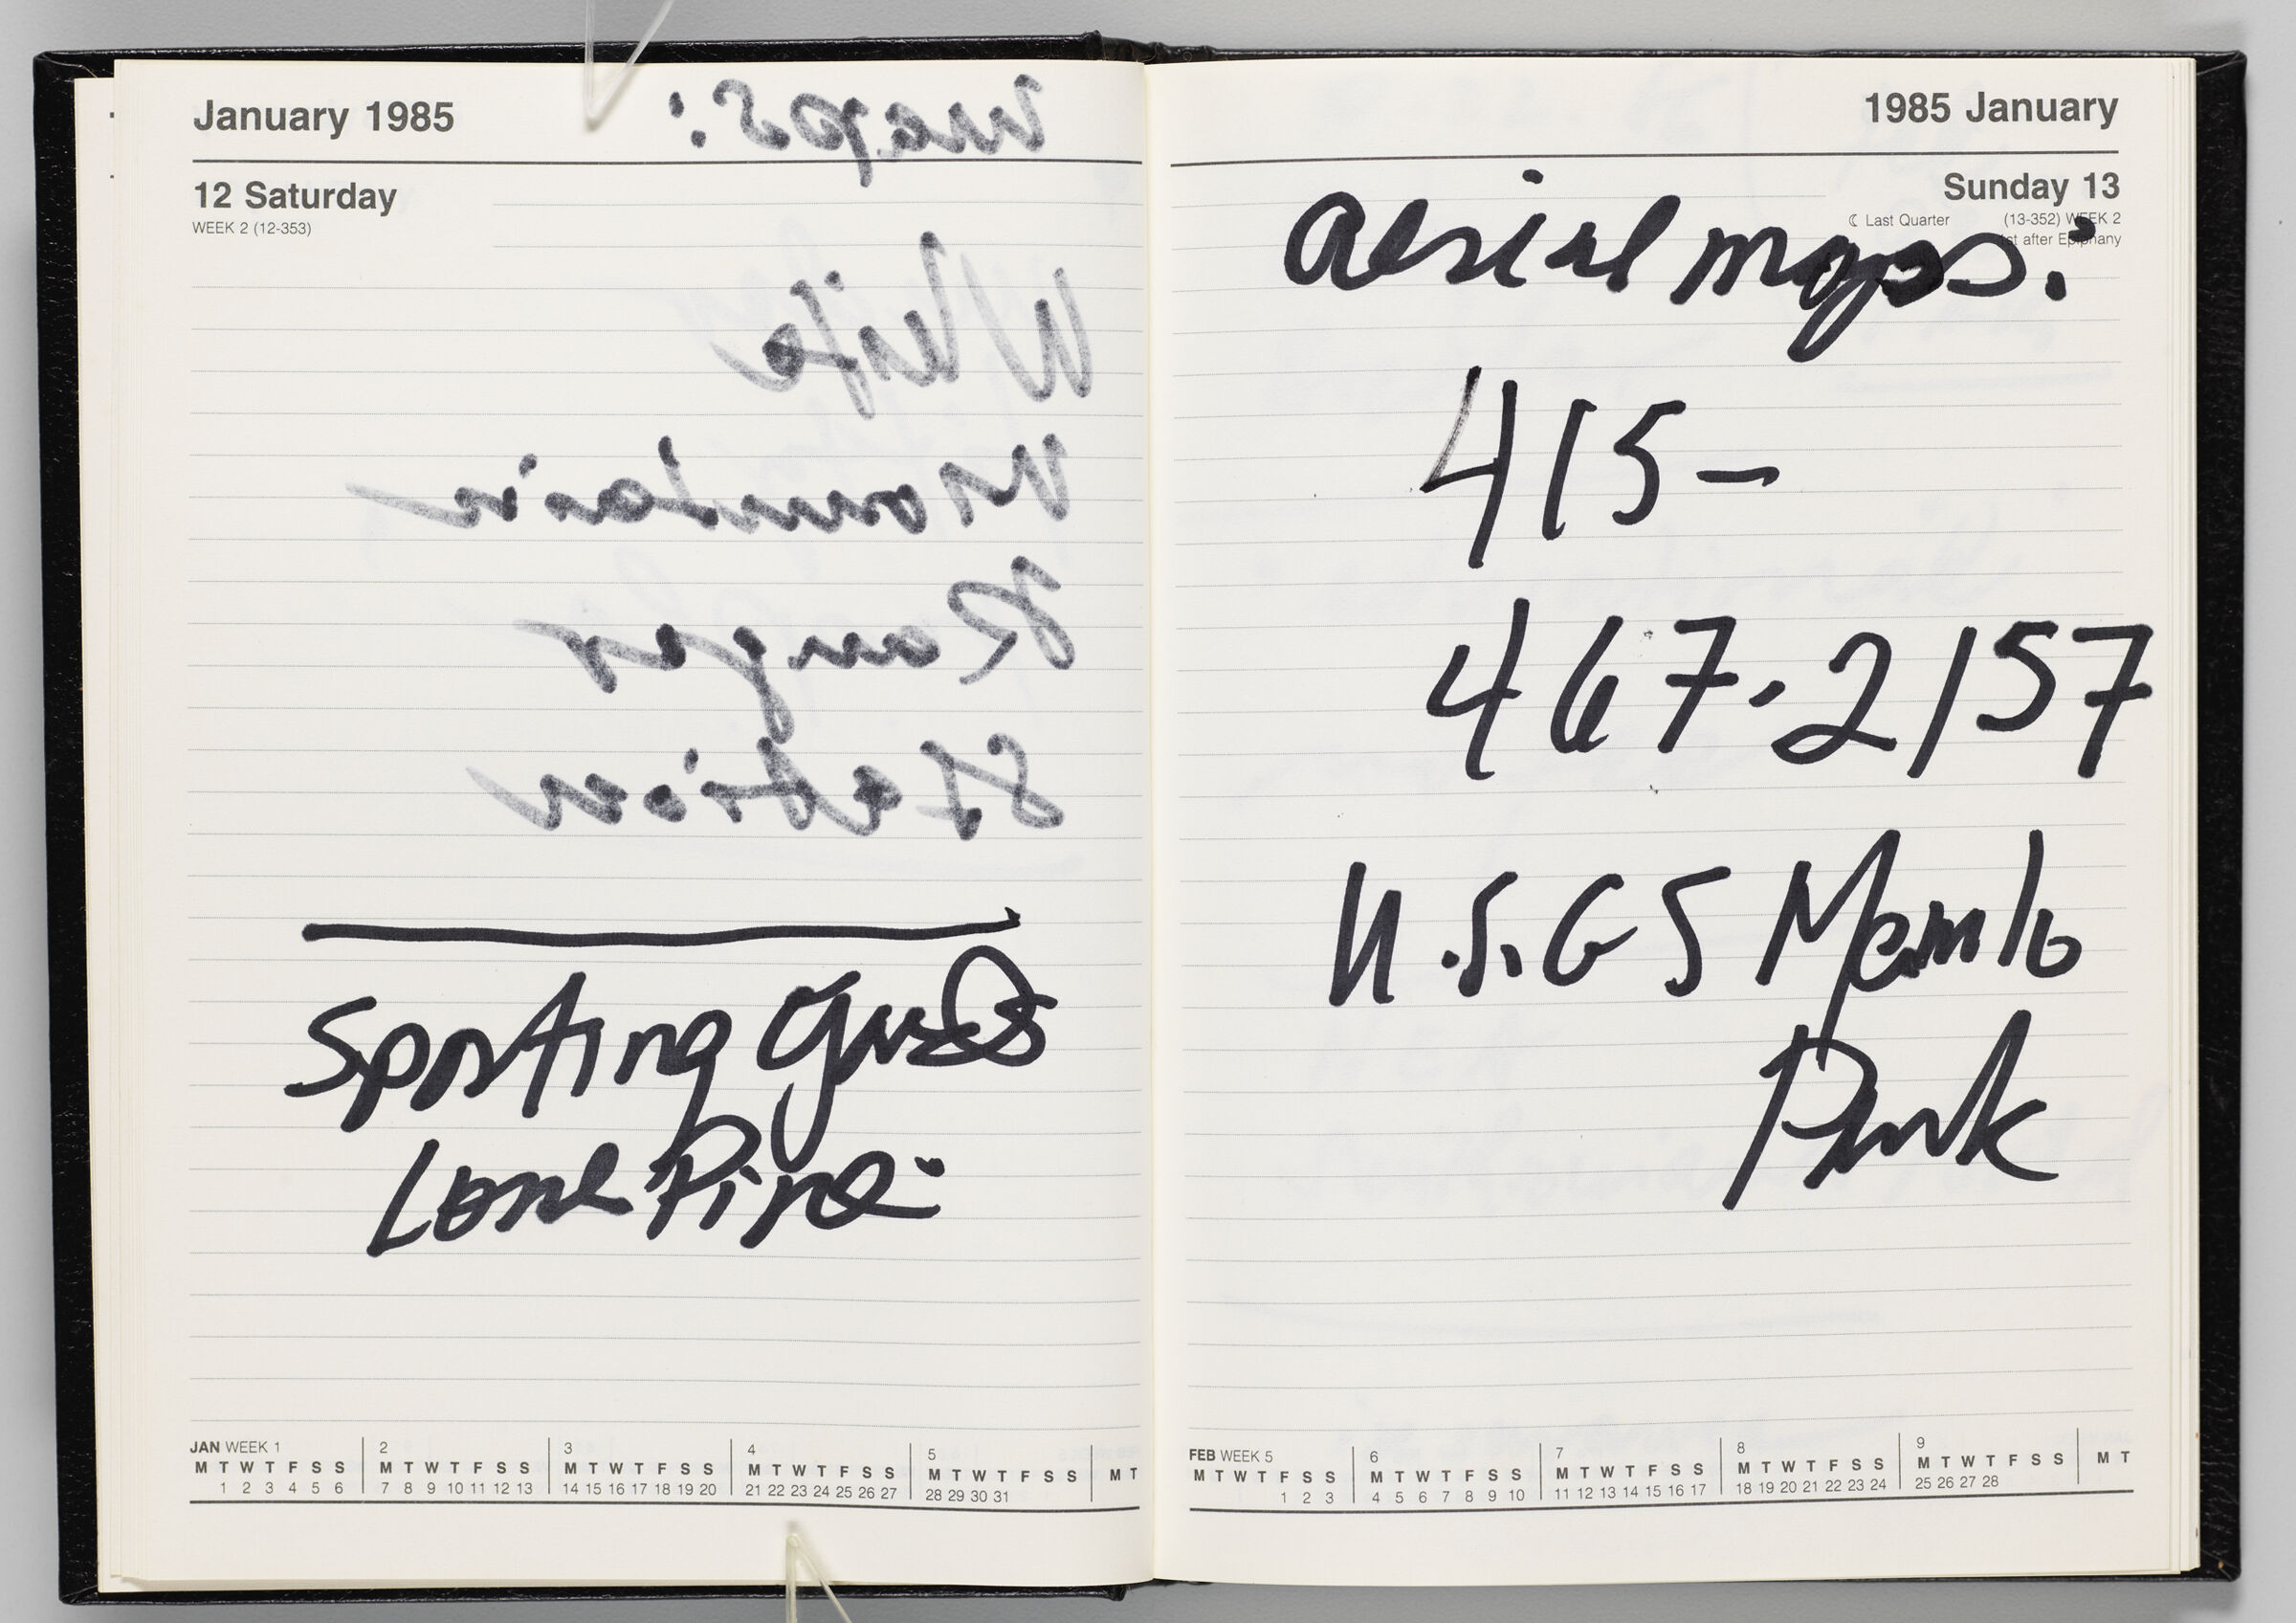 Untitled (Notes And Bleed-Through On Calendar Page January 12, 1985 Left Page); Untitled (Notes On Calendar Page January 13, 1985, Right Page)